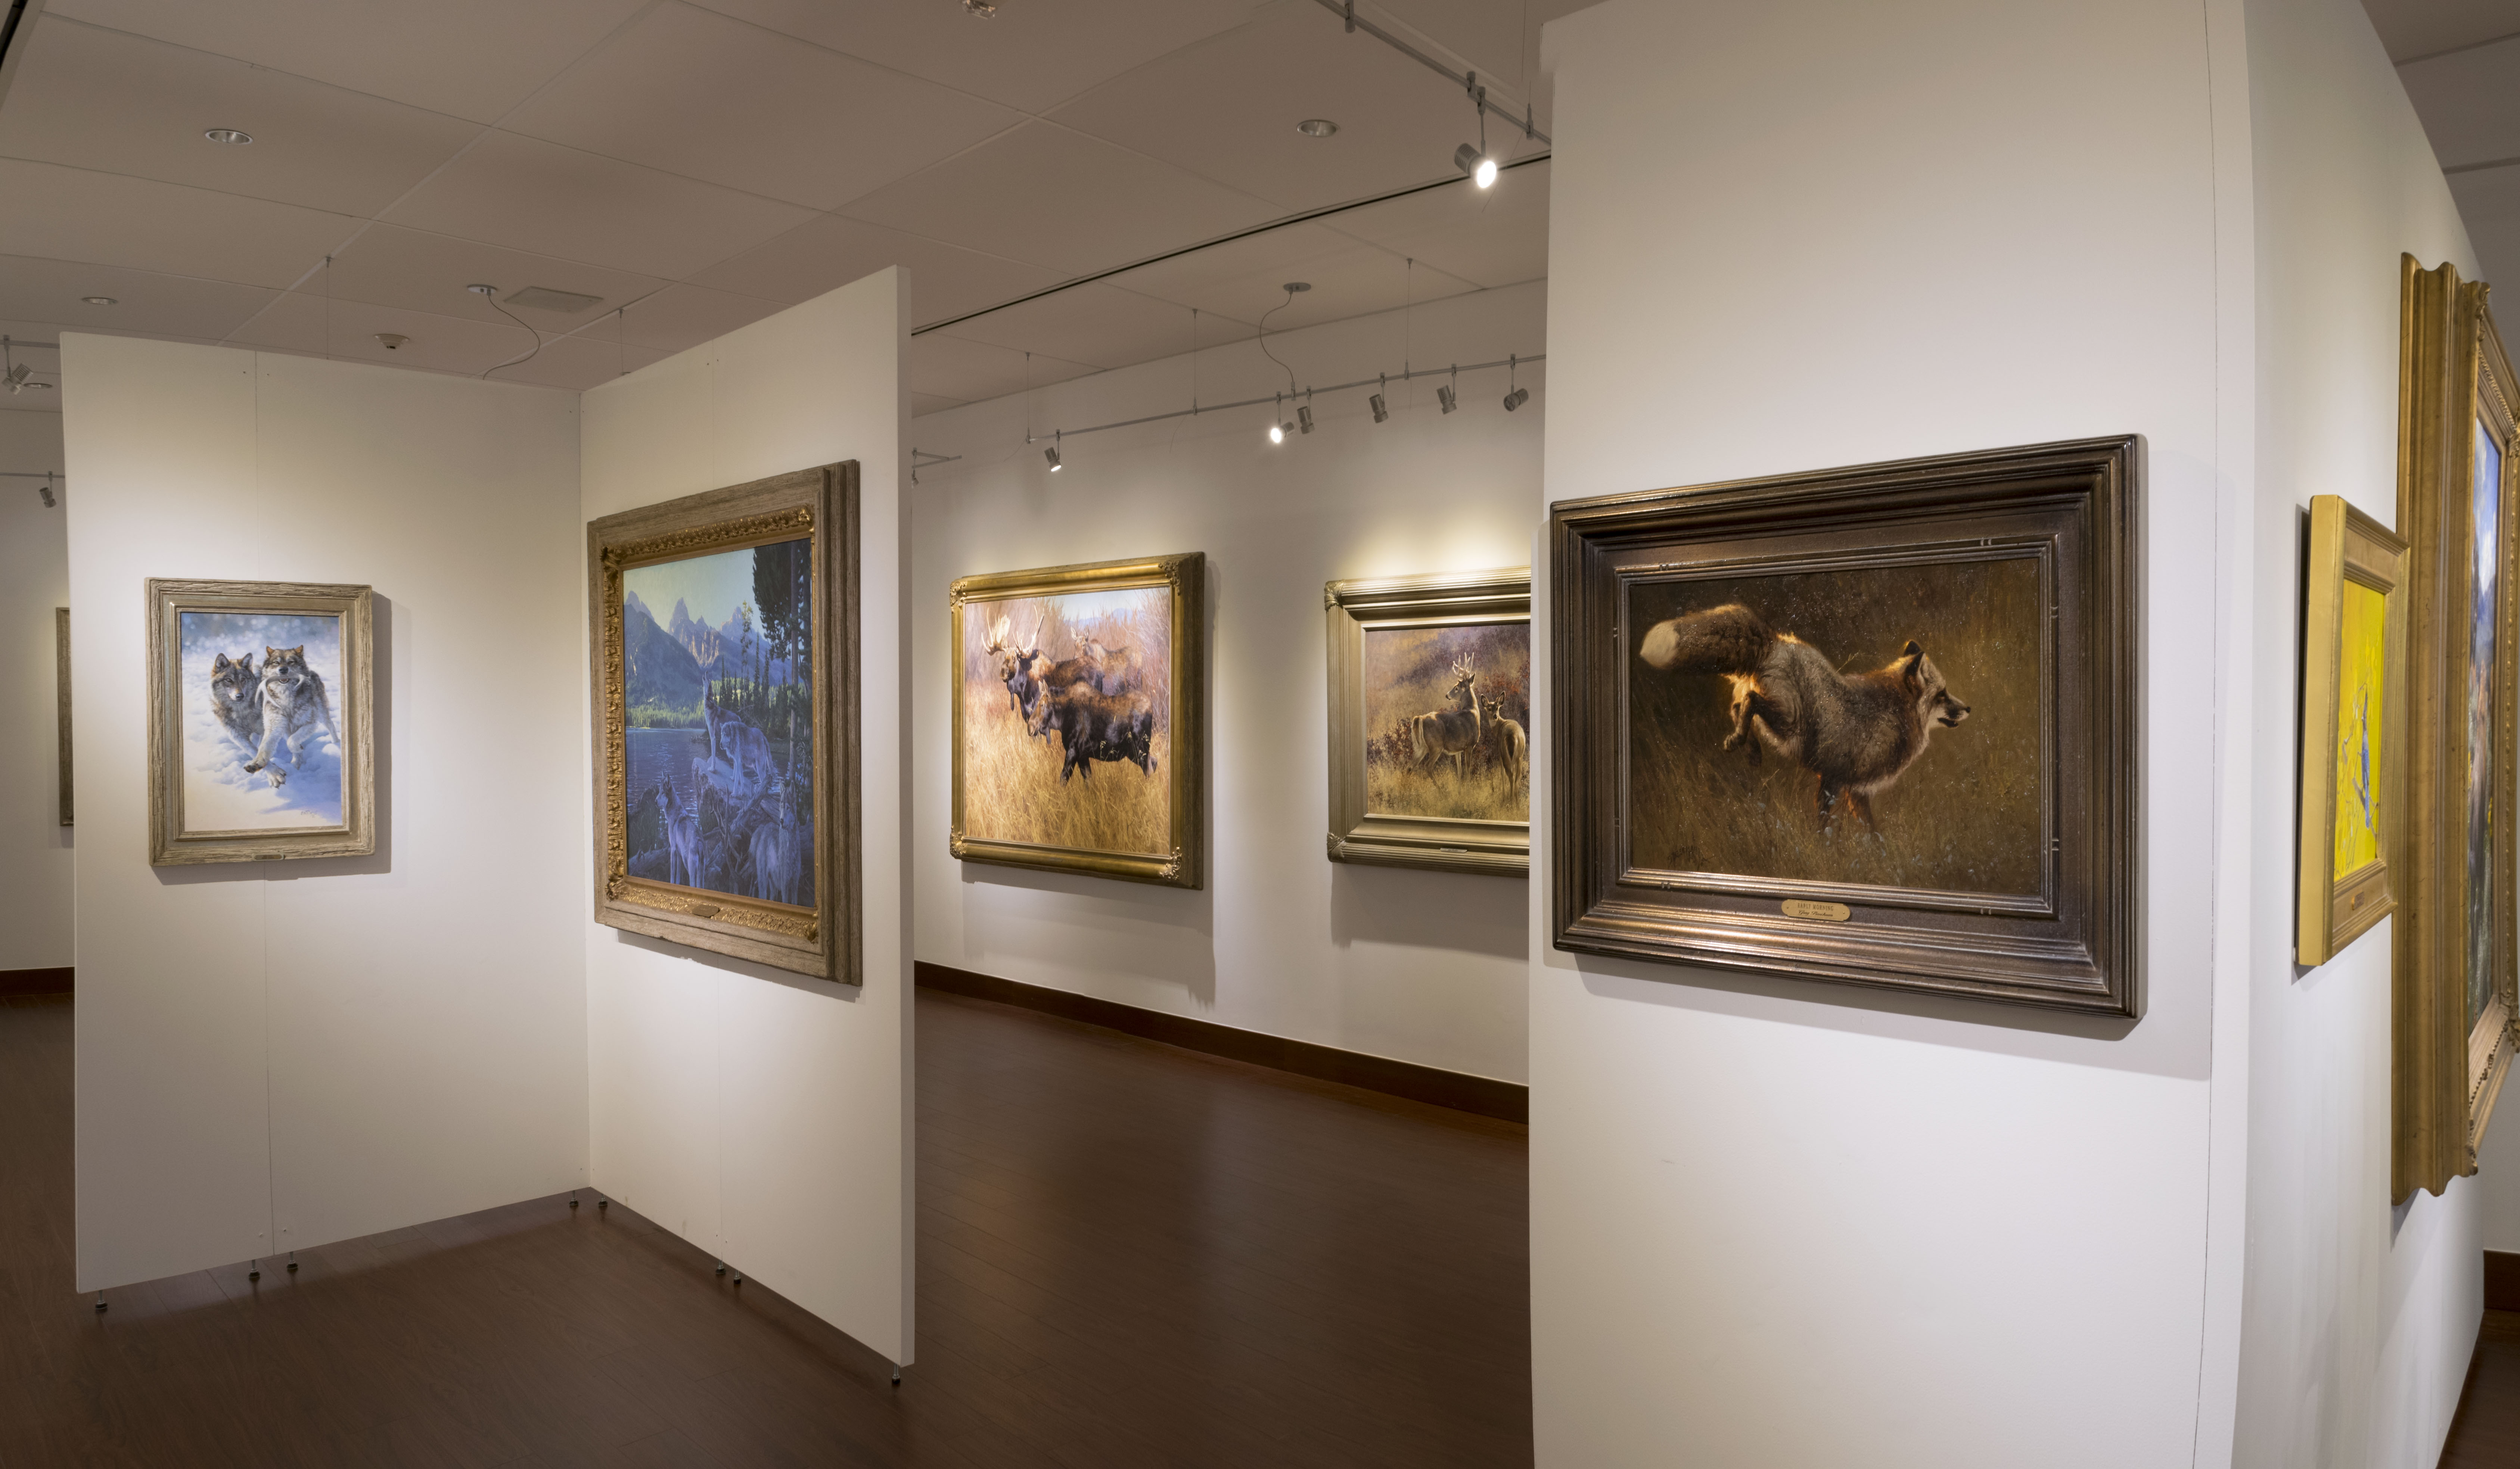 Installation View, Front of Gallery, Creatures of the Wild West: Selections from the Don B. Huntley Collection, 2016.